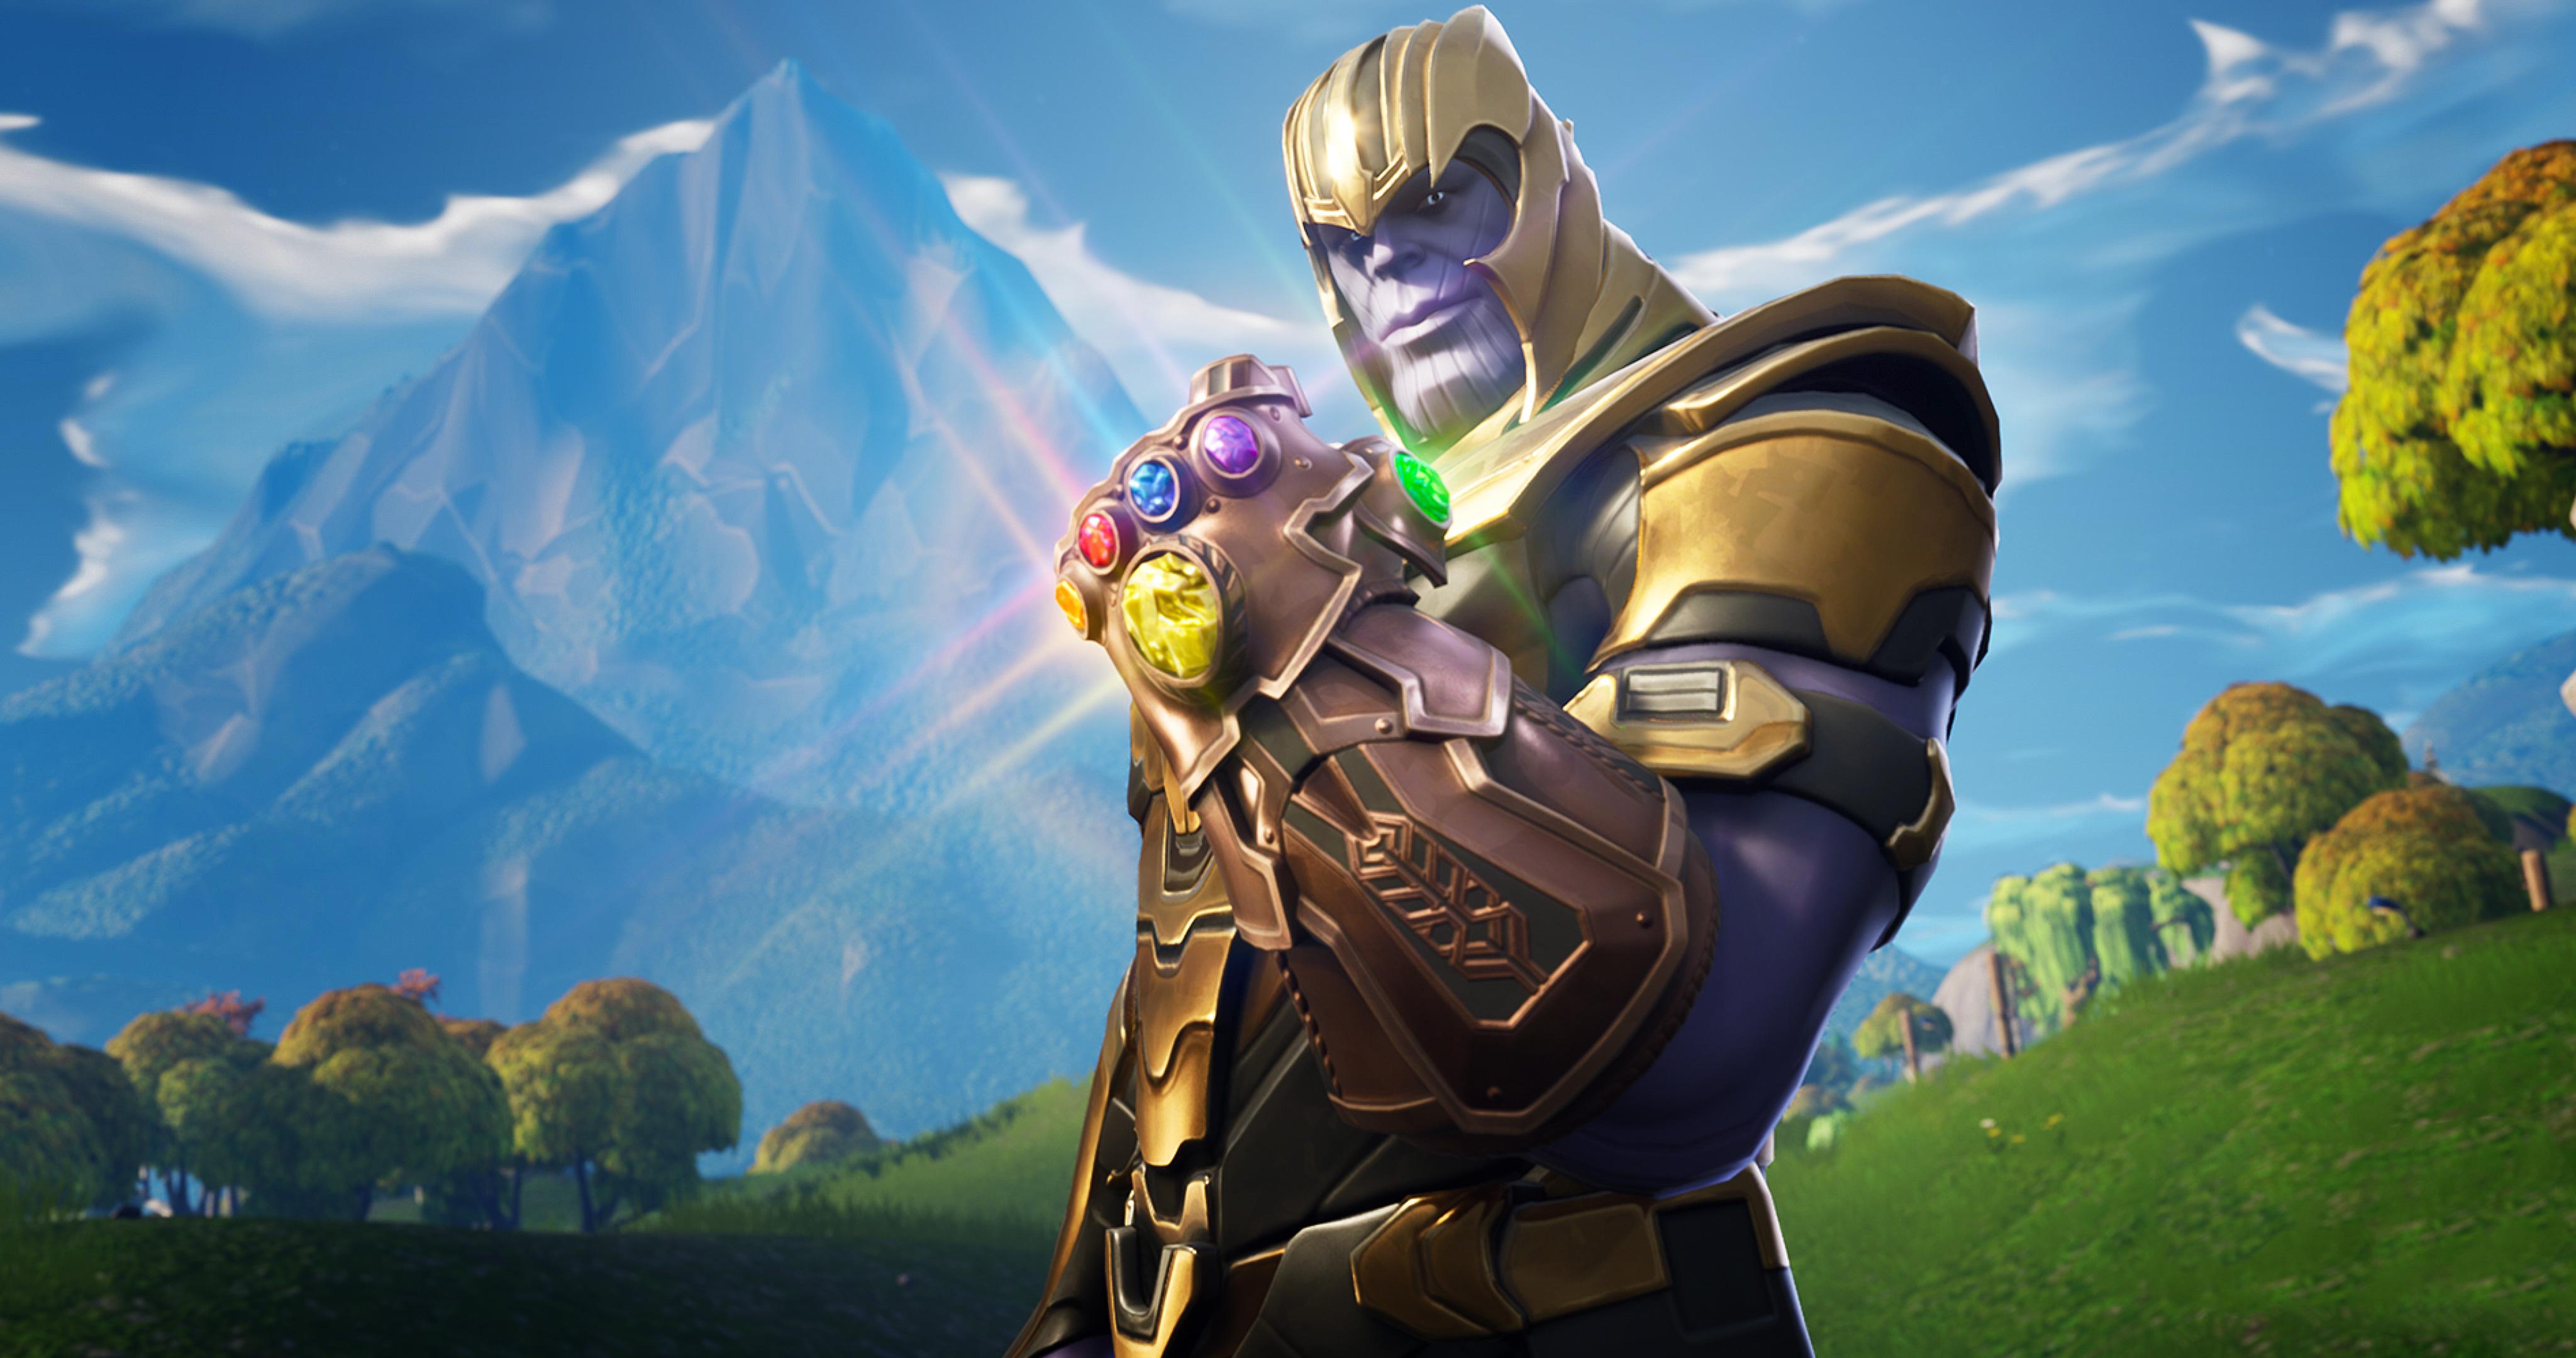 4096 x 2160 · jpeg - Thanos In Fortnite Battle Royale, HD Games, 4k Wallpapers, Images ...